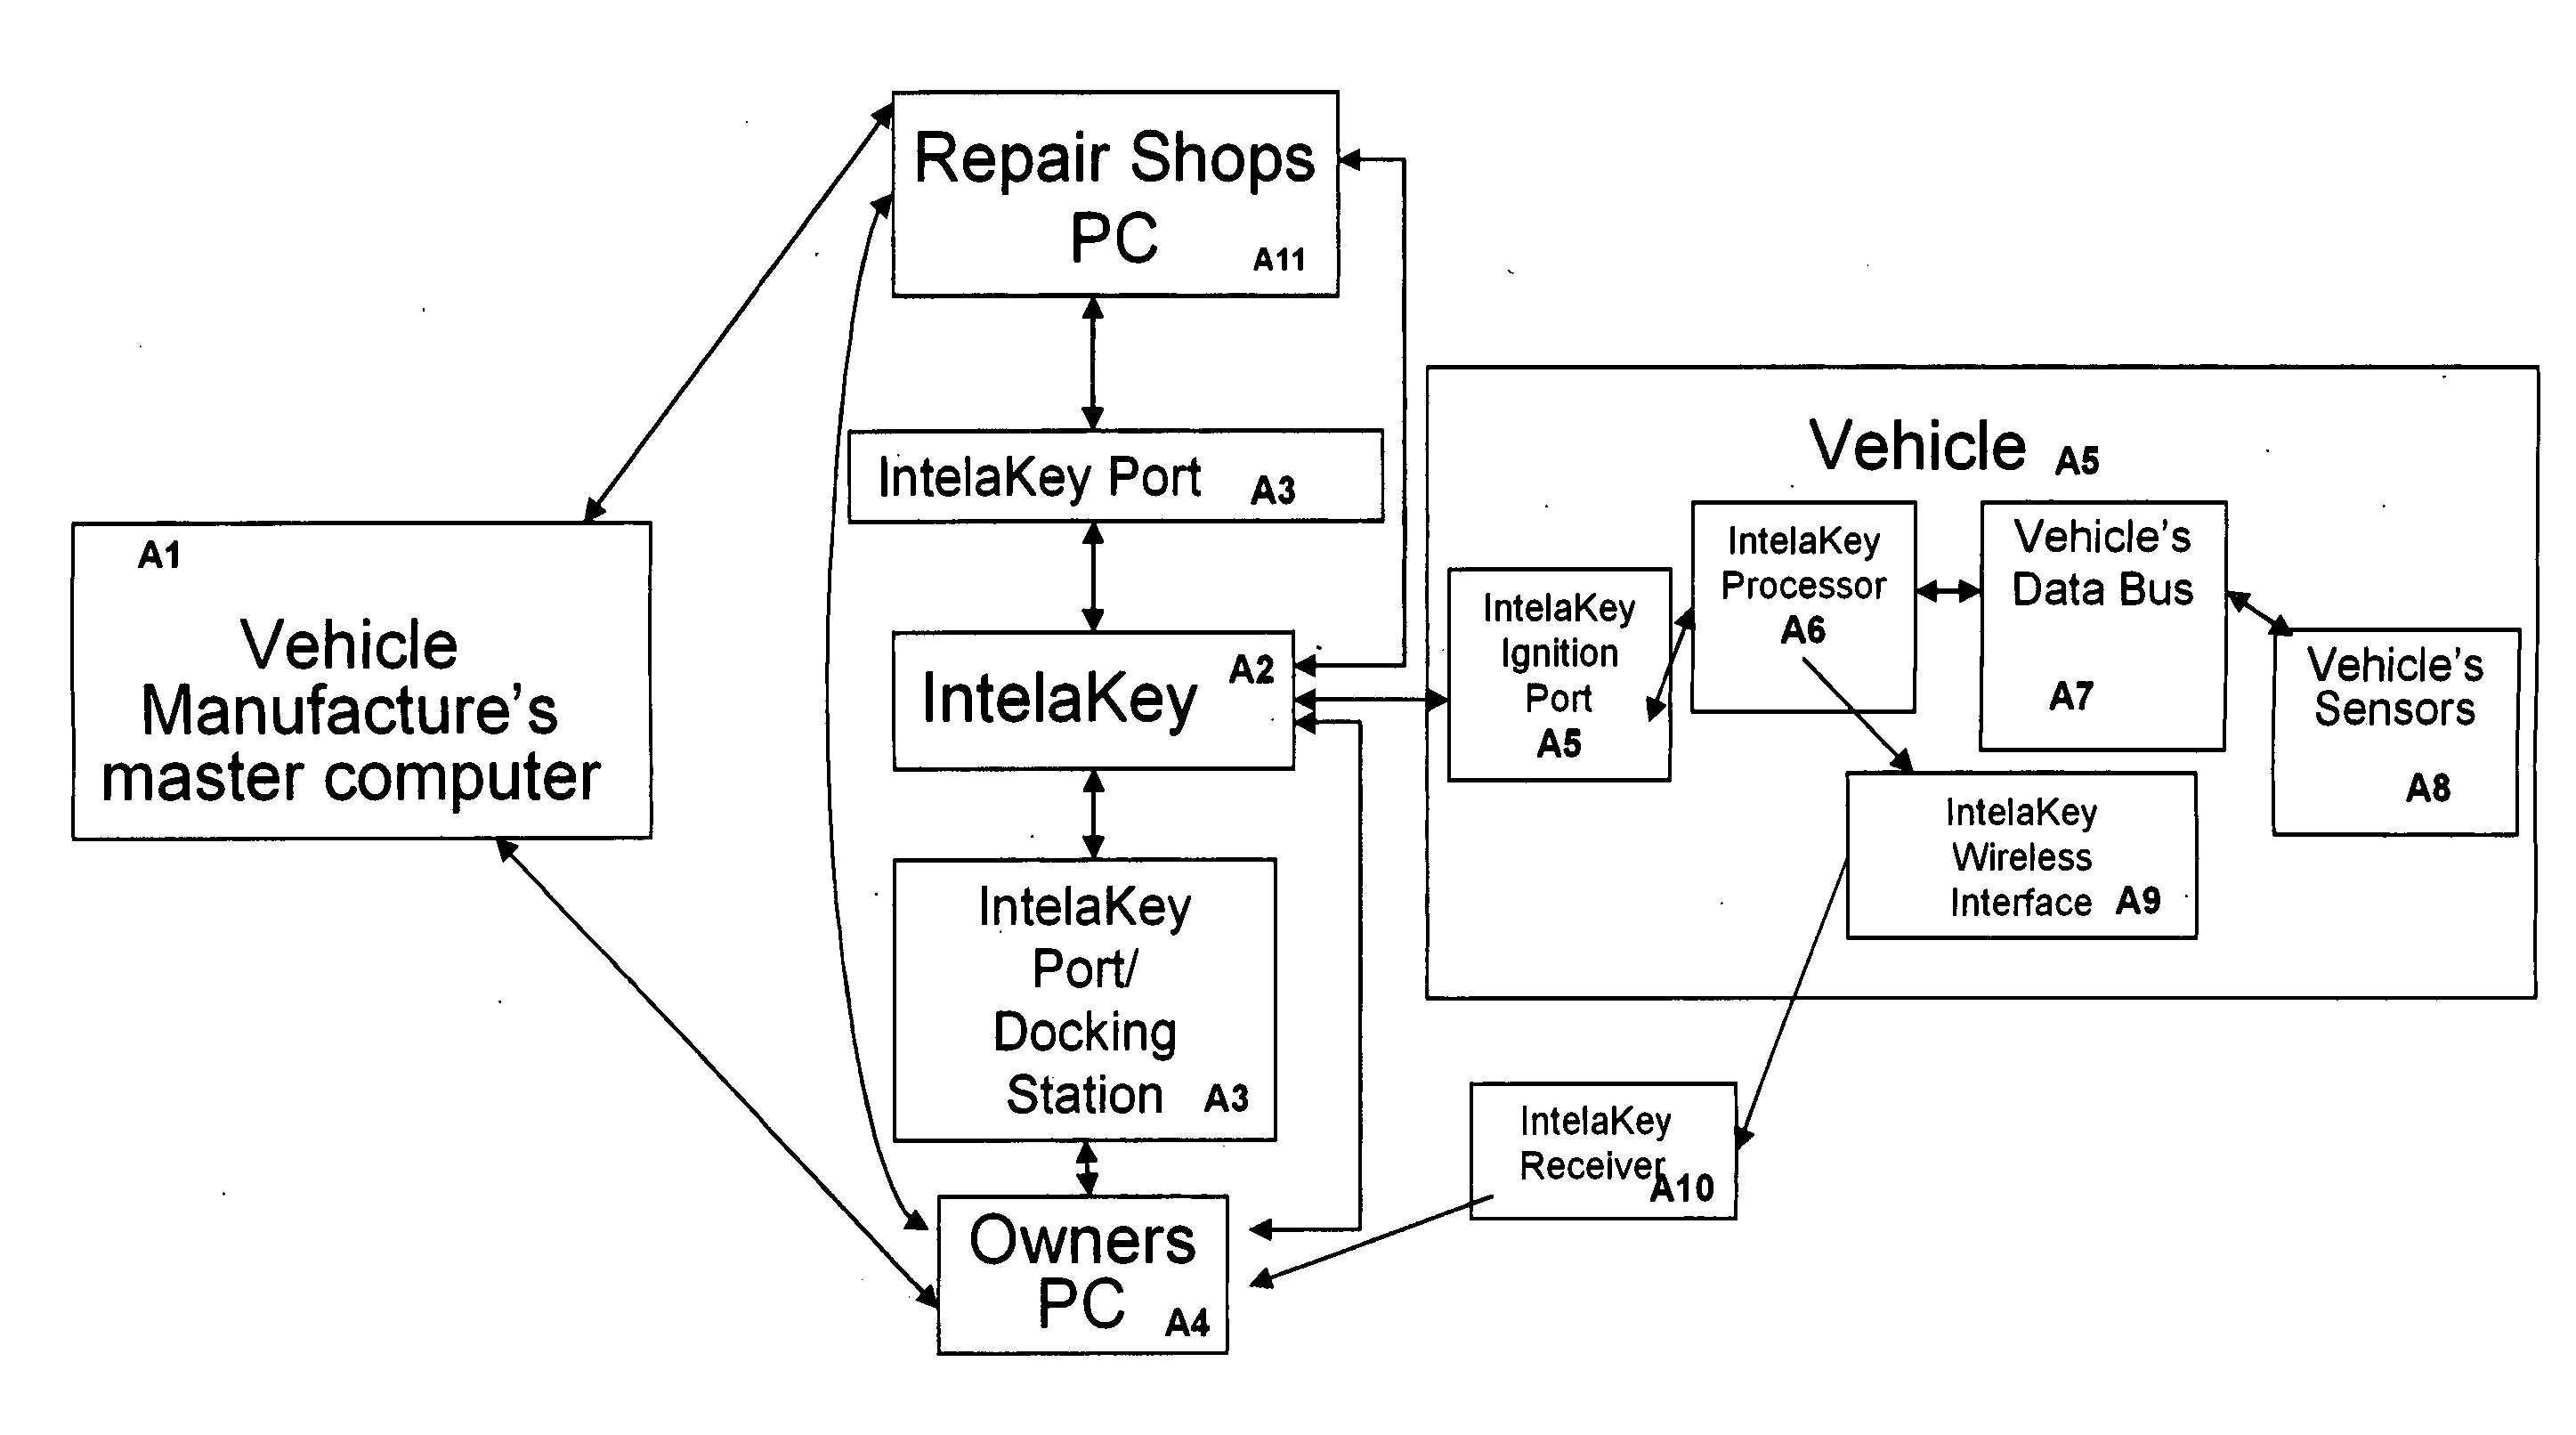 System and method for using a vehicle's key to collect vehicle data and diagnose mechanical problems, to store and compare security data to allow only authorized use of vehicles and a method to automatically set vehicle features usng the key